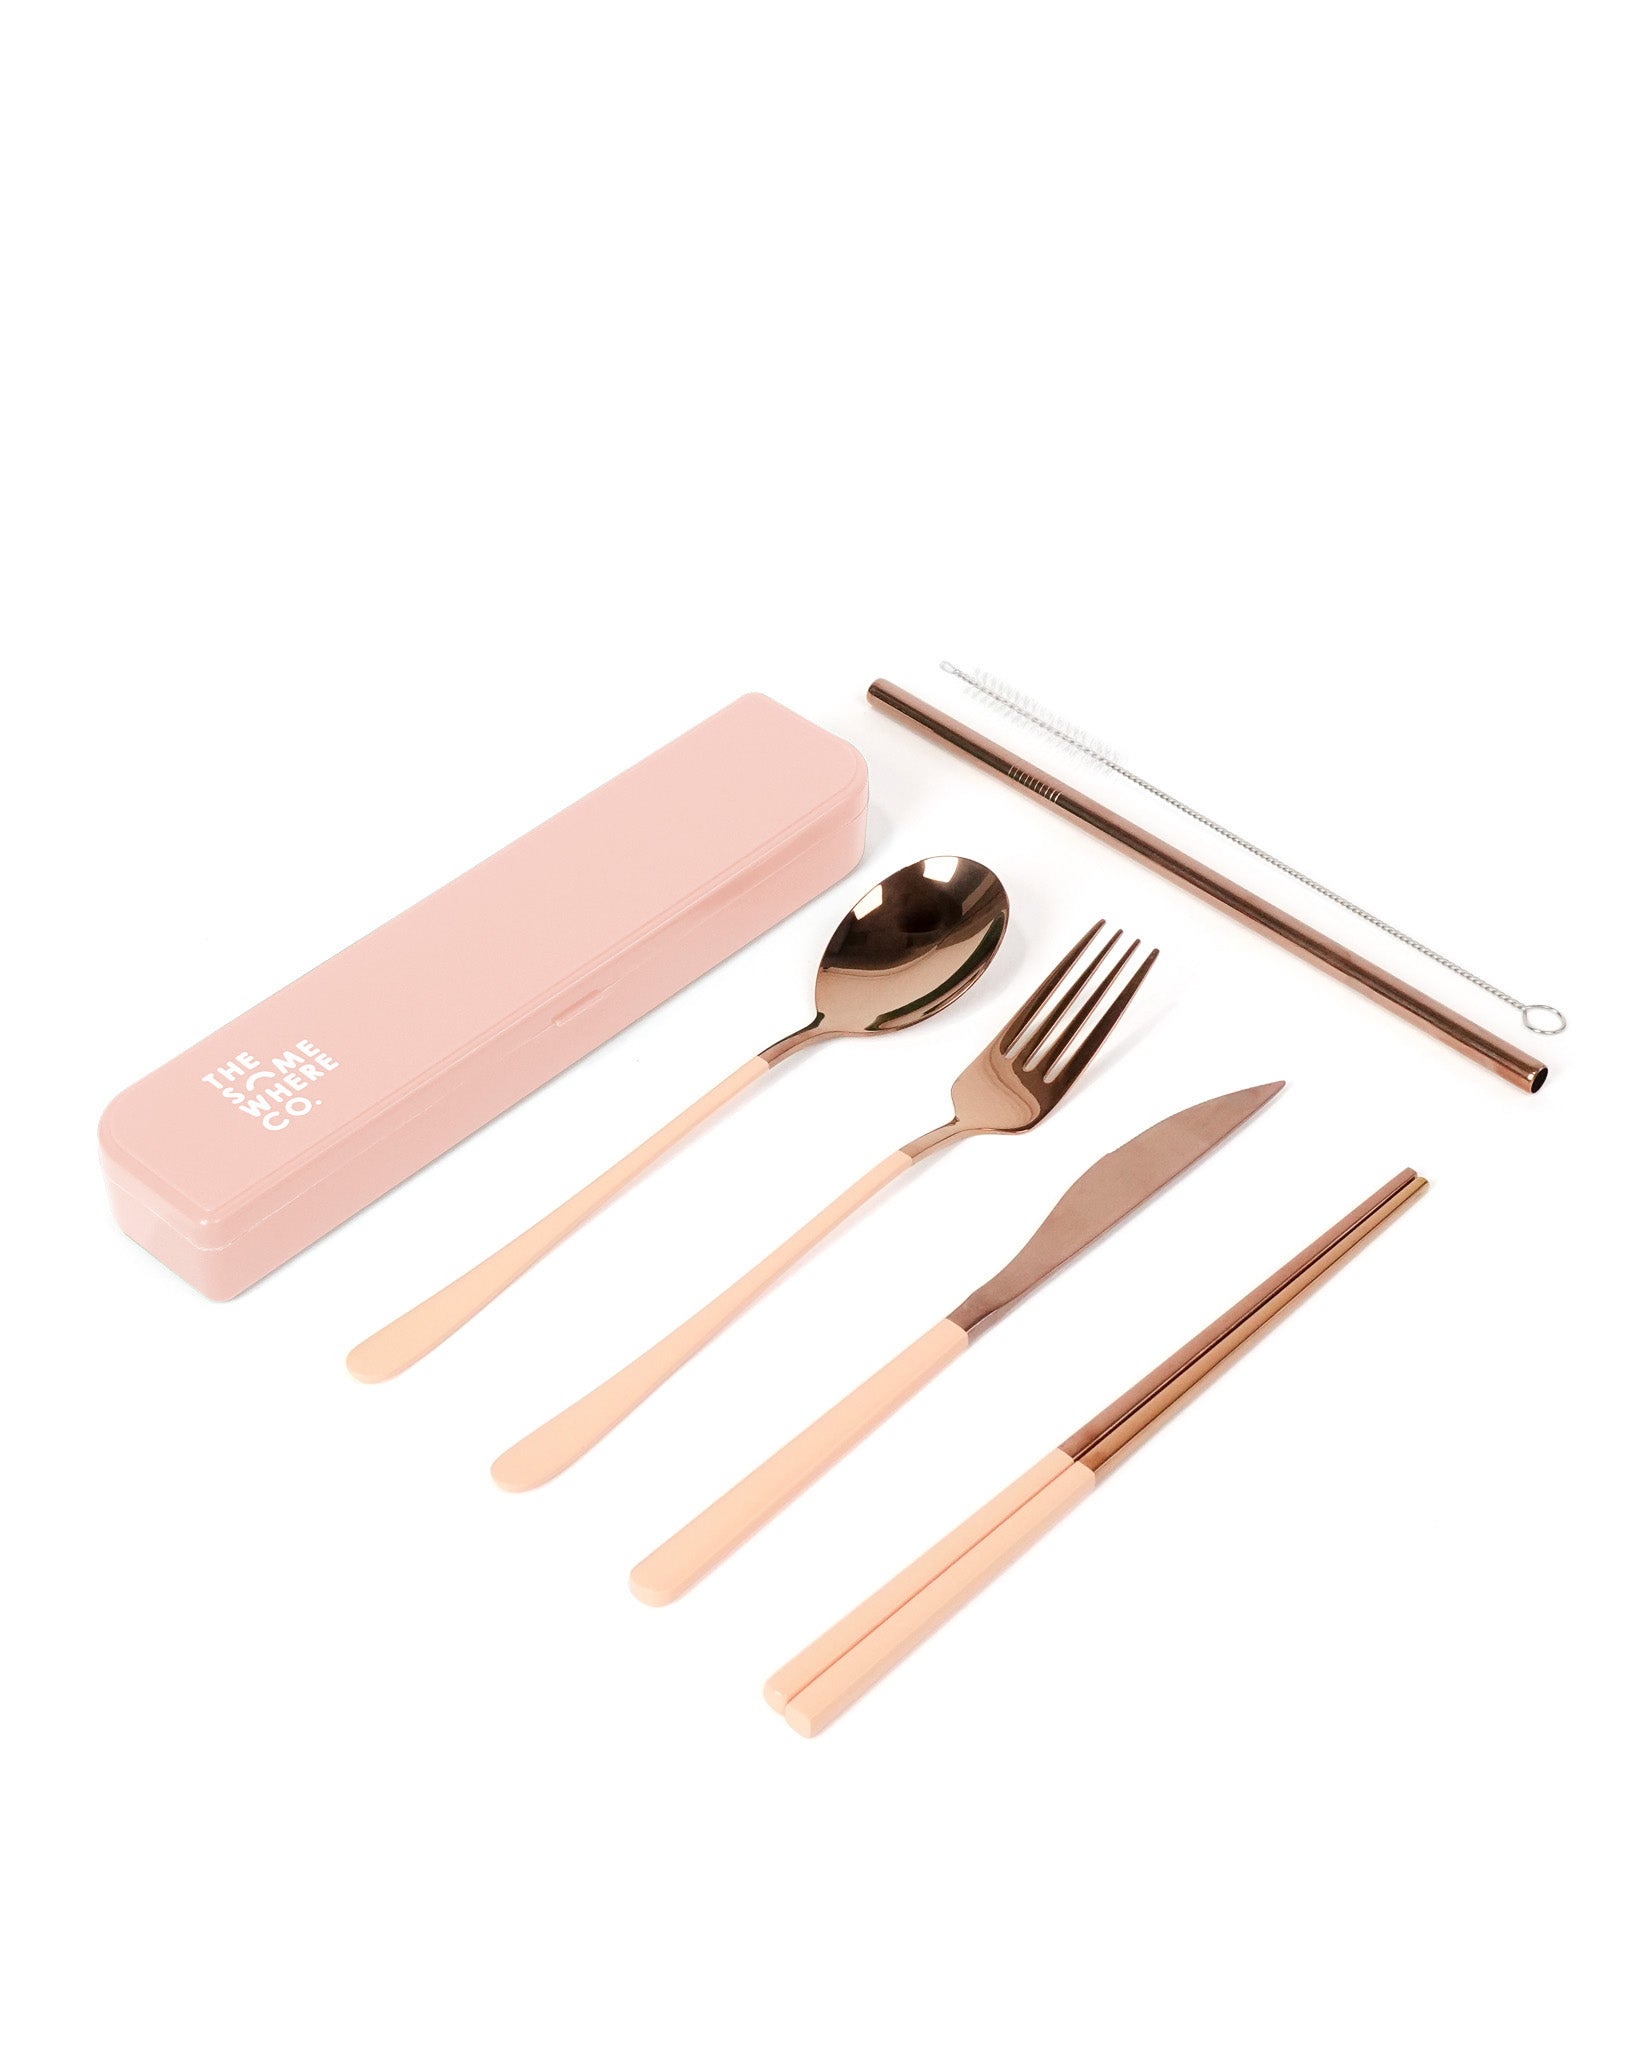 Cutlery Kit - Rose Gold with Blush Handle